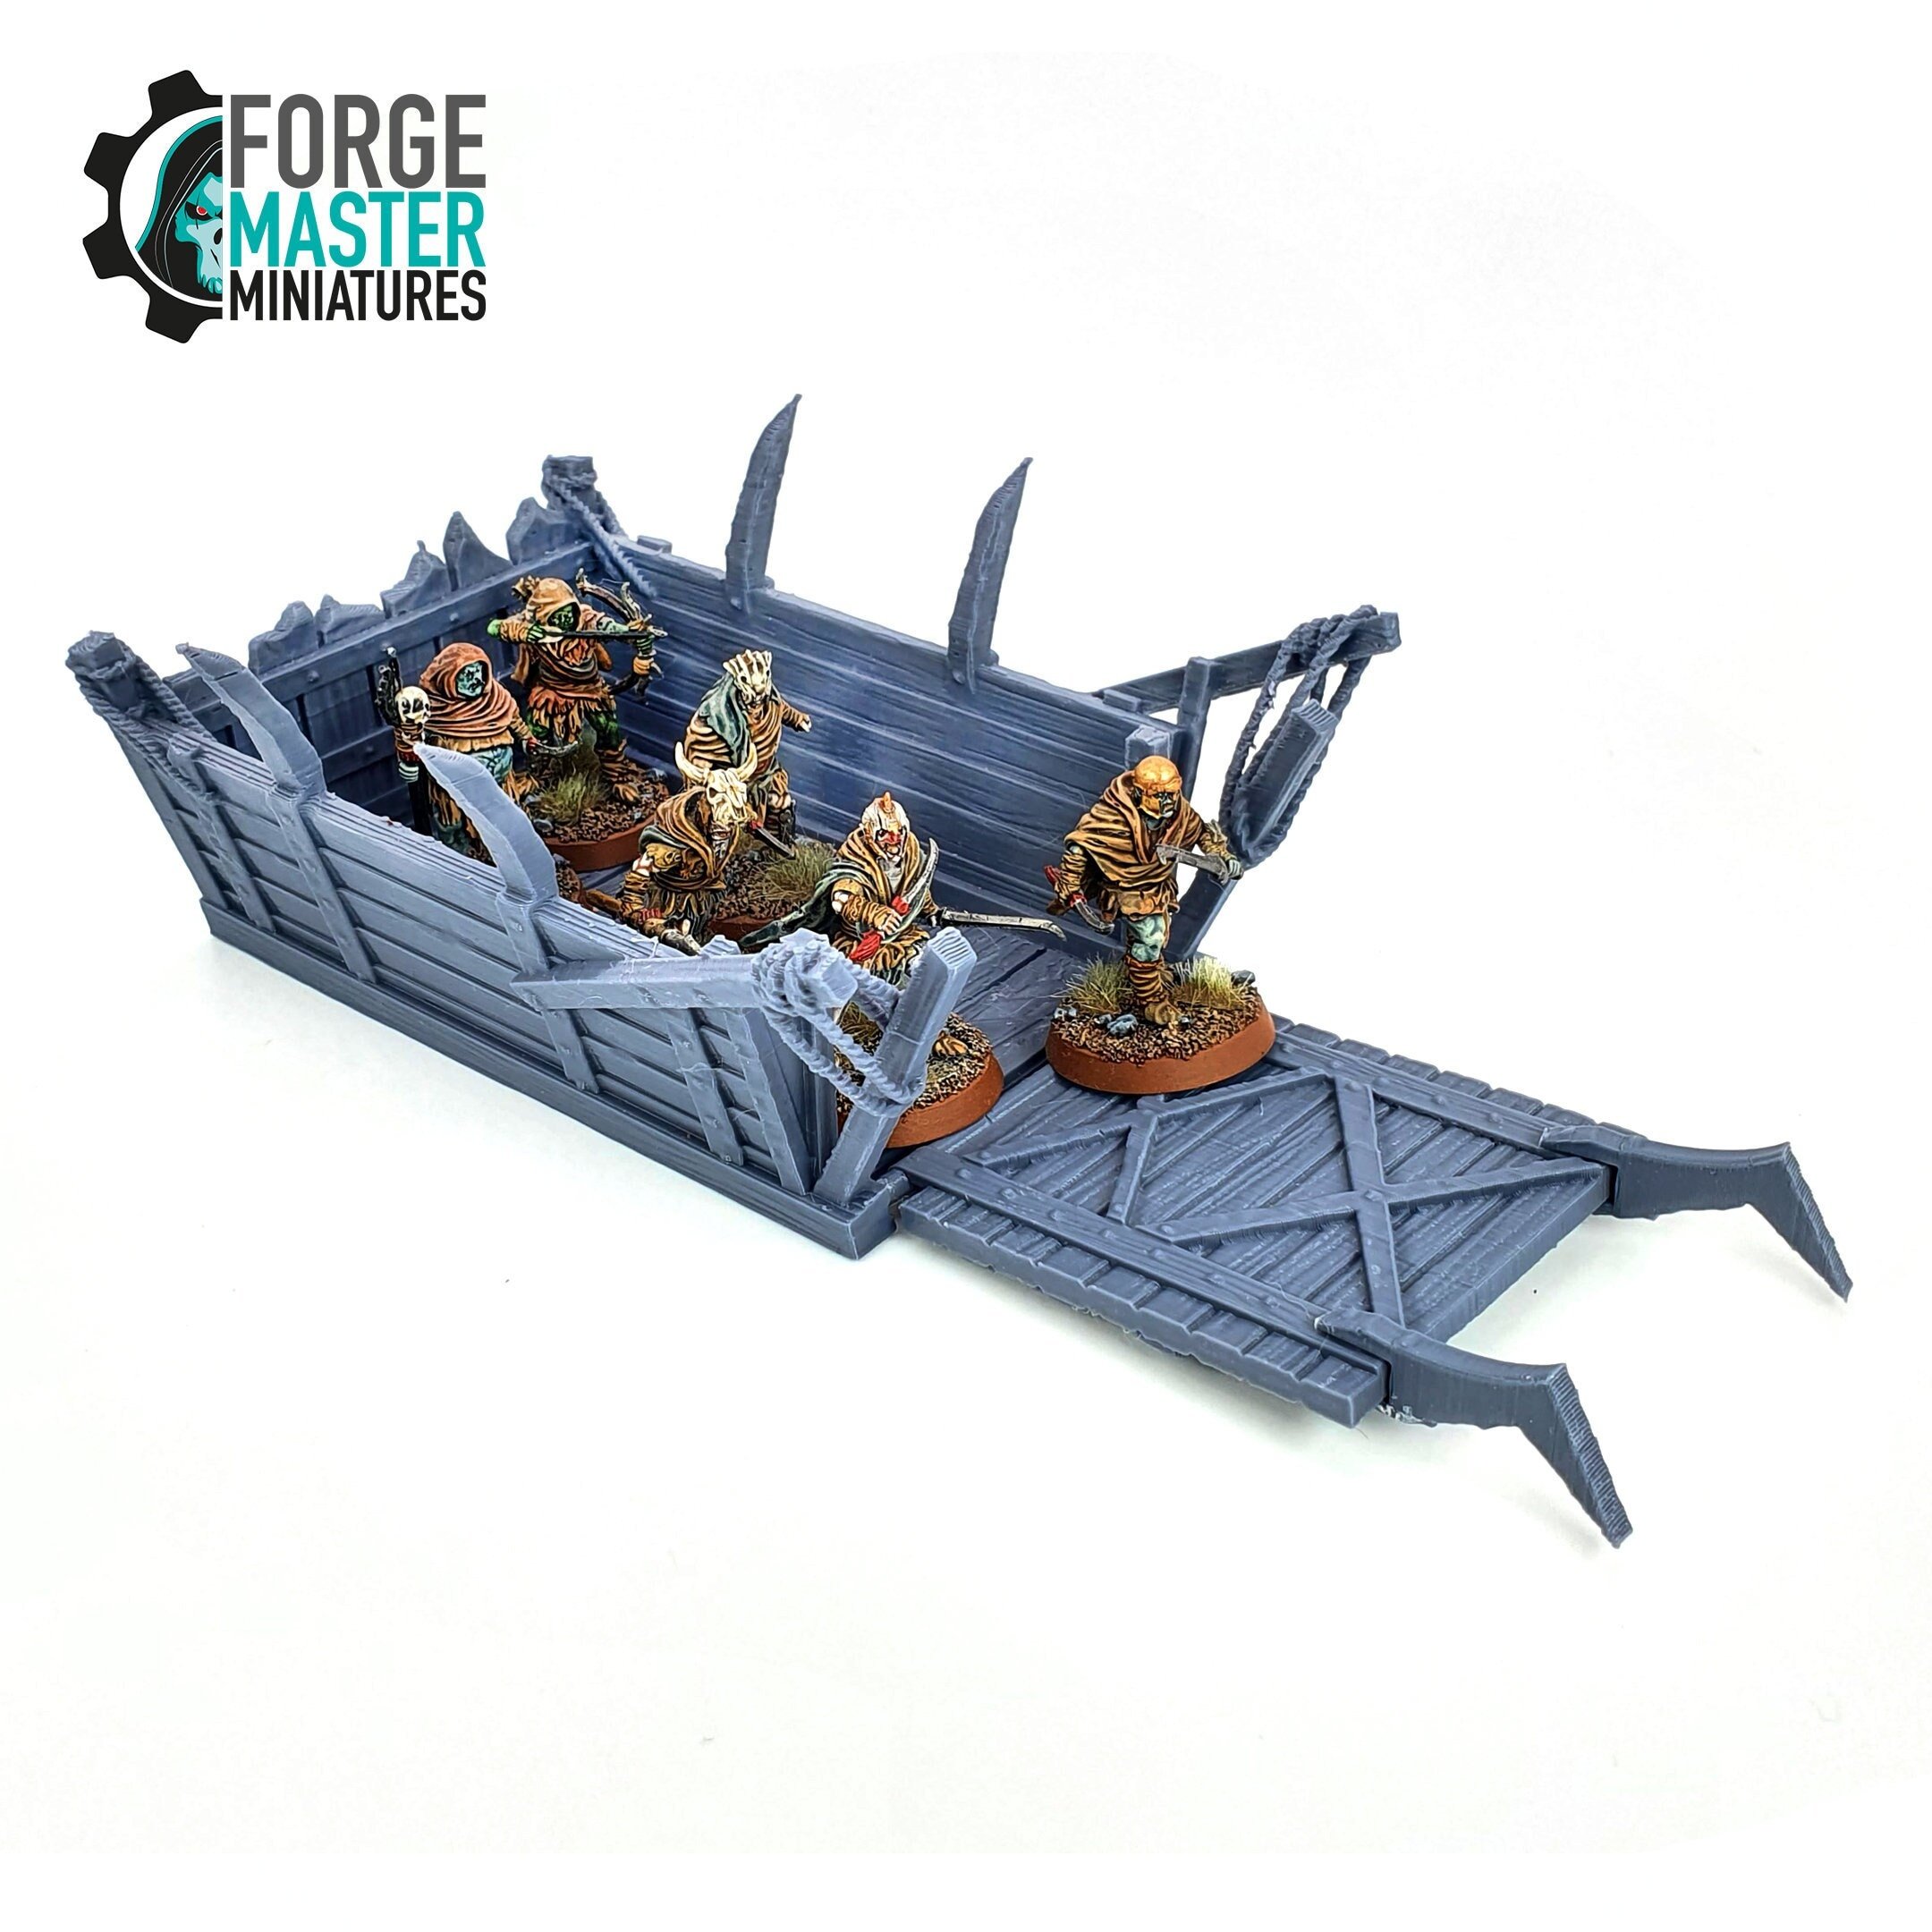 Orc Siege Boat wargaming miniatures designed by The Printing Goes Ever On 3D printed by Forgemaster Miniatures